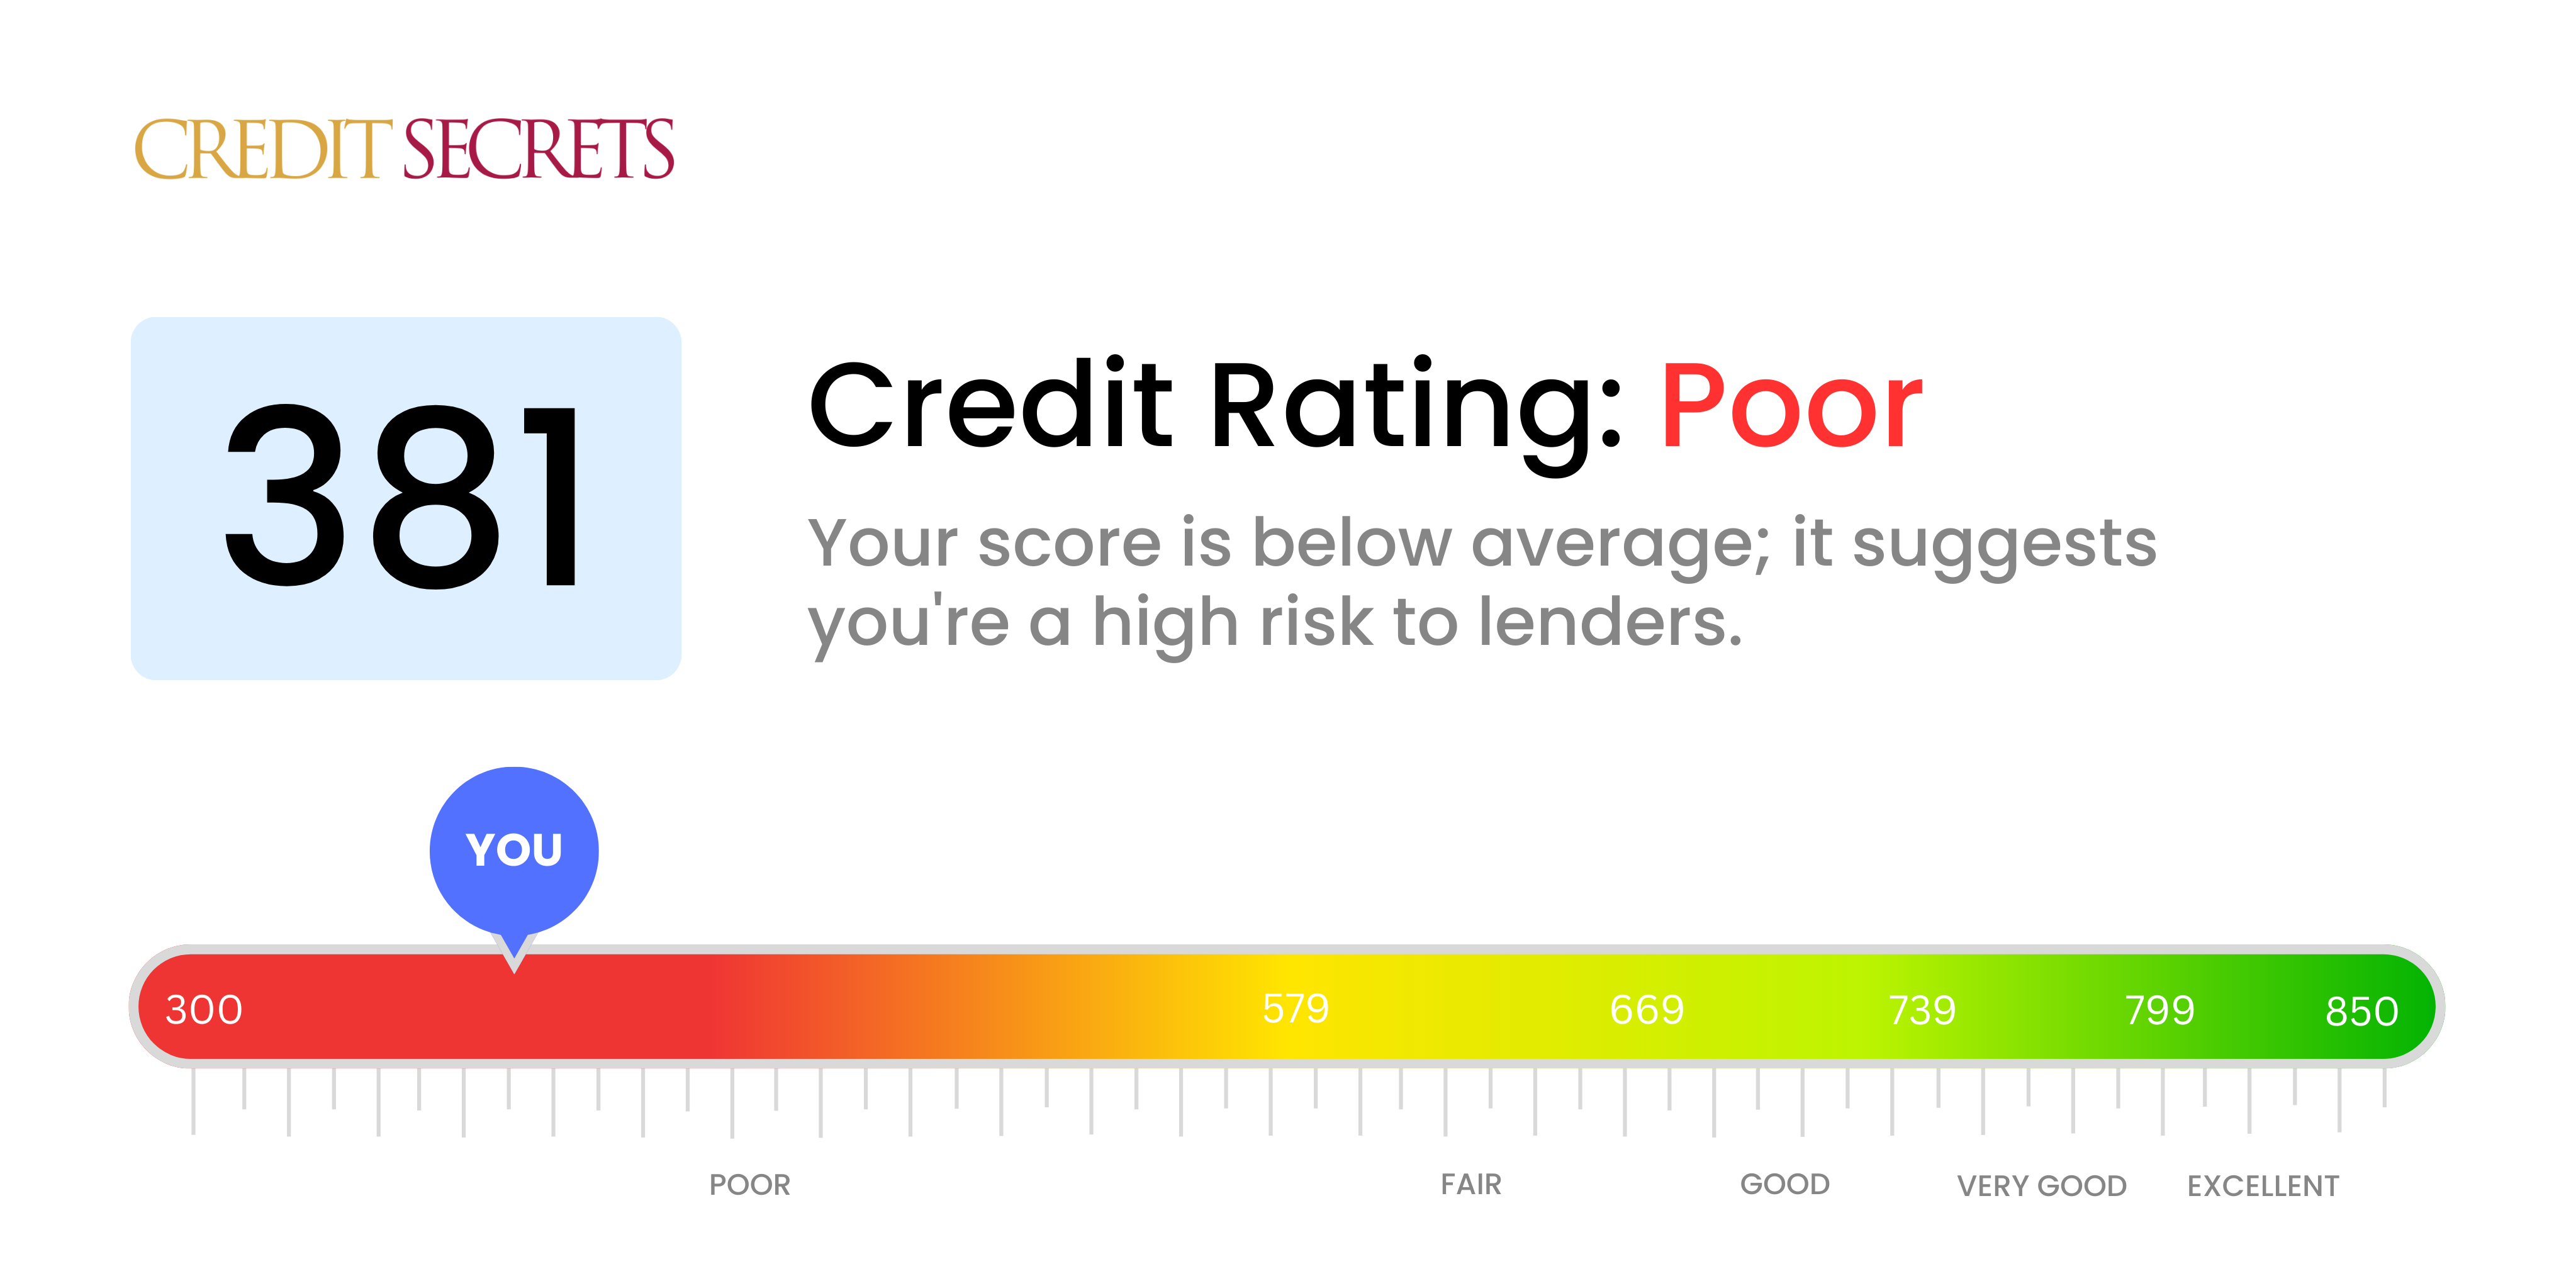 Is 381 a good credit score?